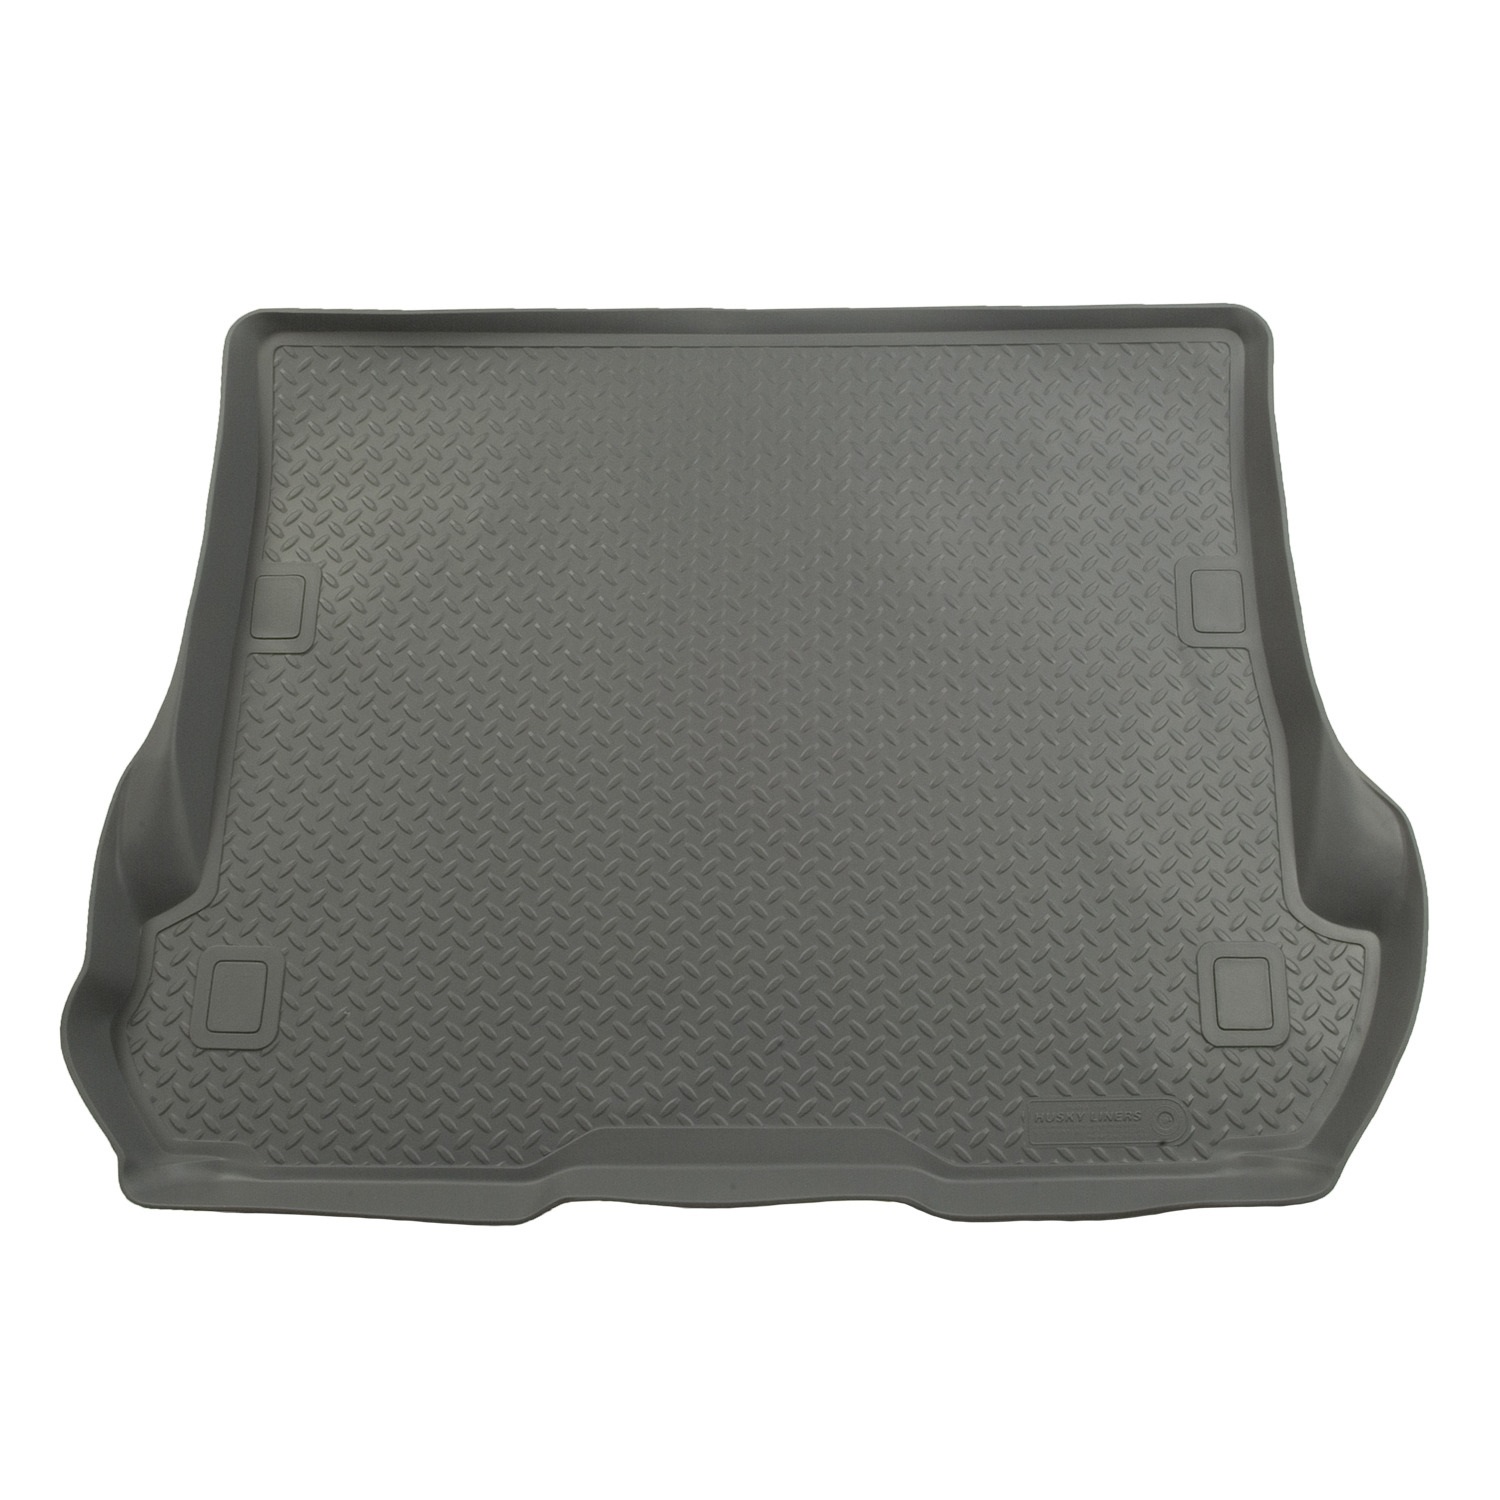 Husky Liners Husky Liners 20252 Classic Style; Cargo Liner Fits 08-12 Liberty